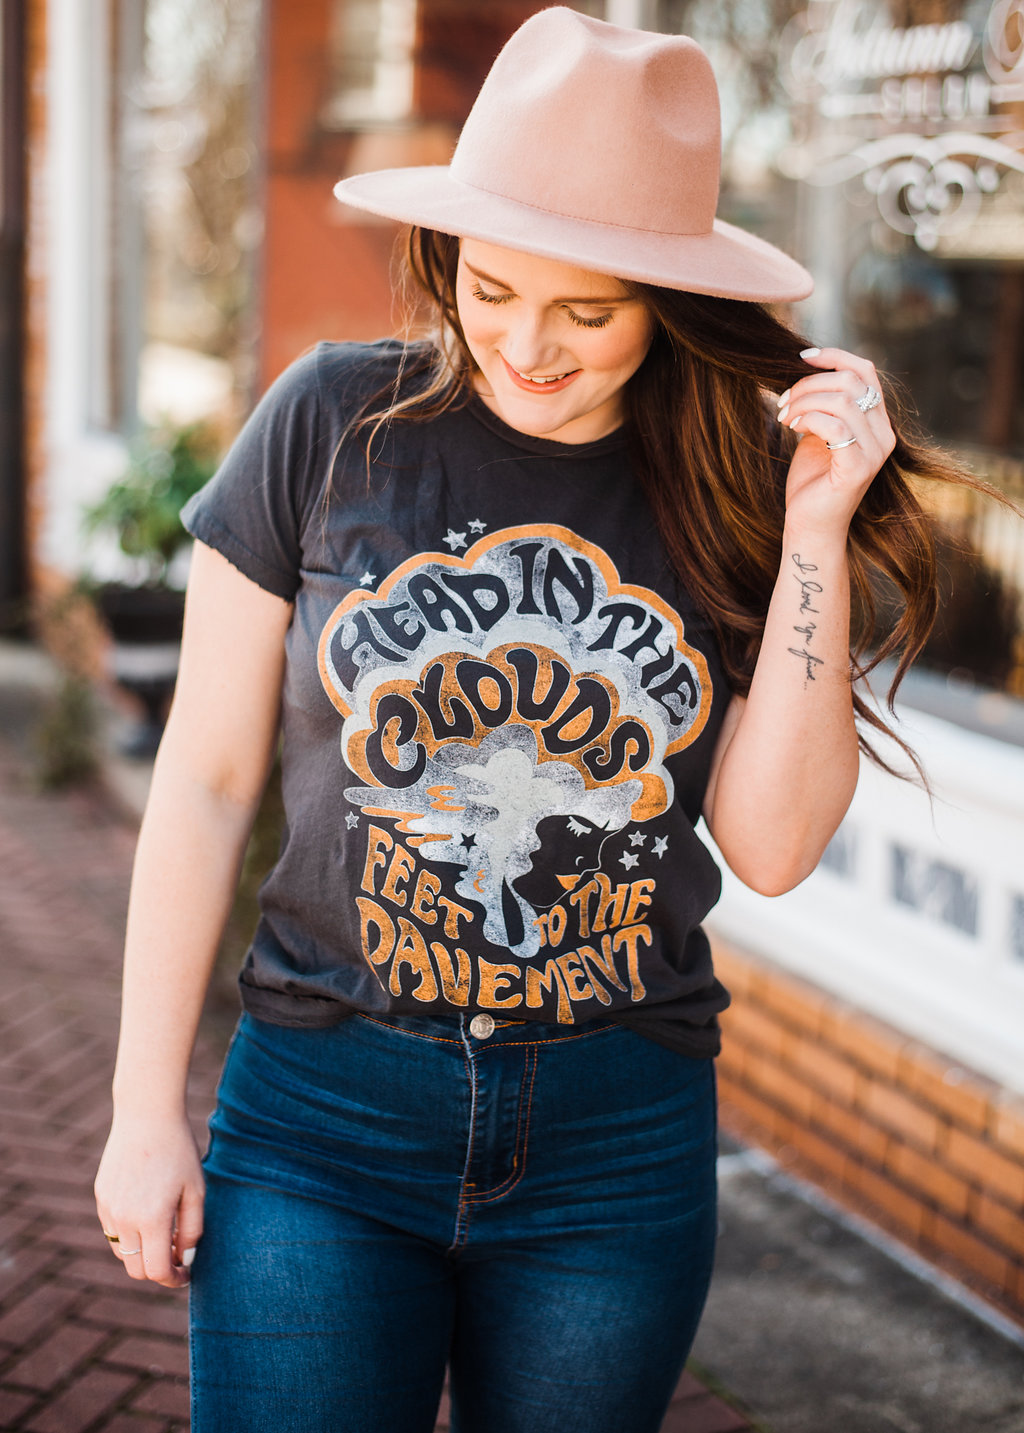 The Most Empowering Graphic Tees